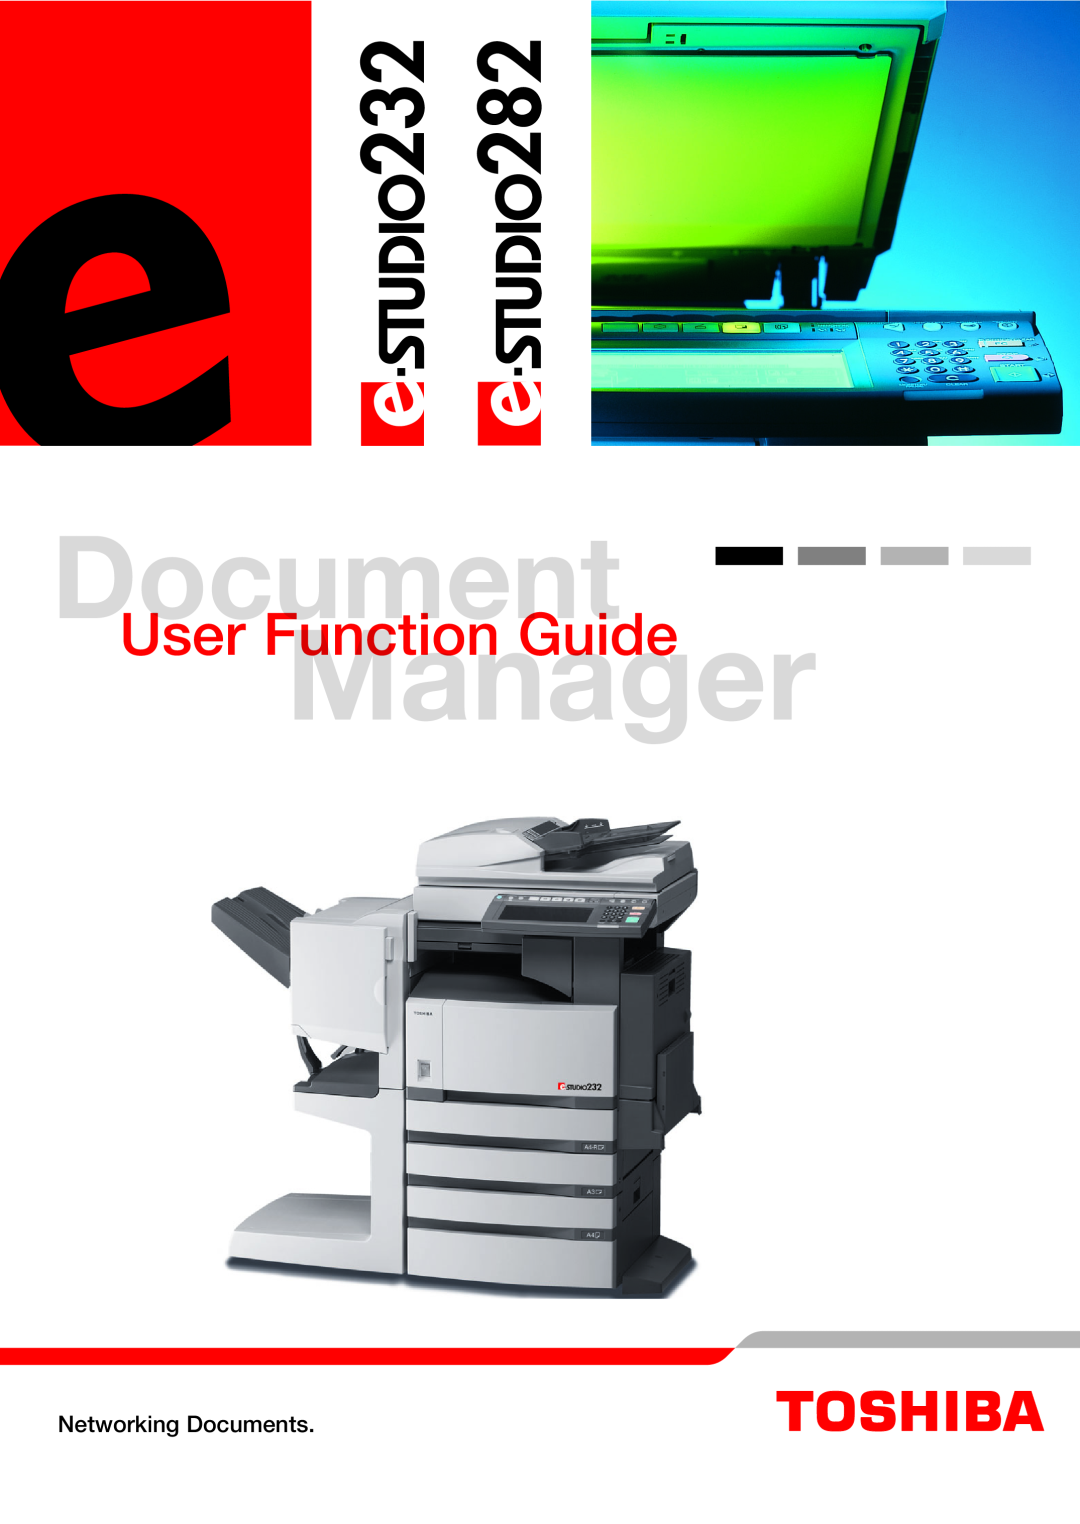 Toshiba 282, 232, 202L manual Manager, User Function Guide, Networking Documents 